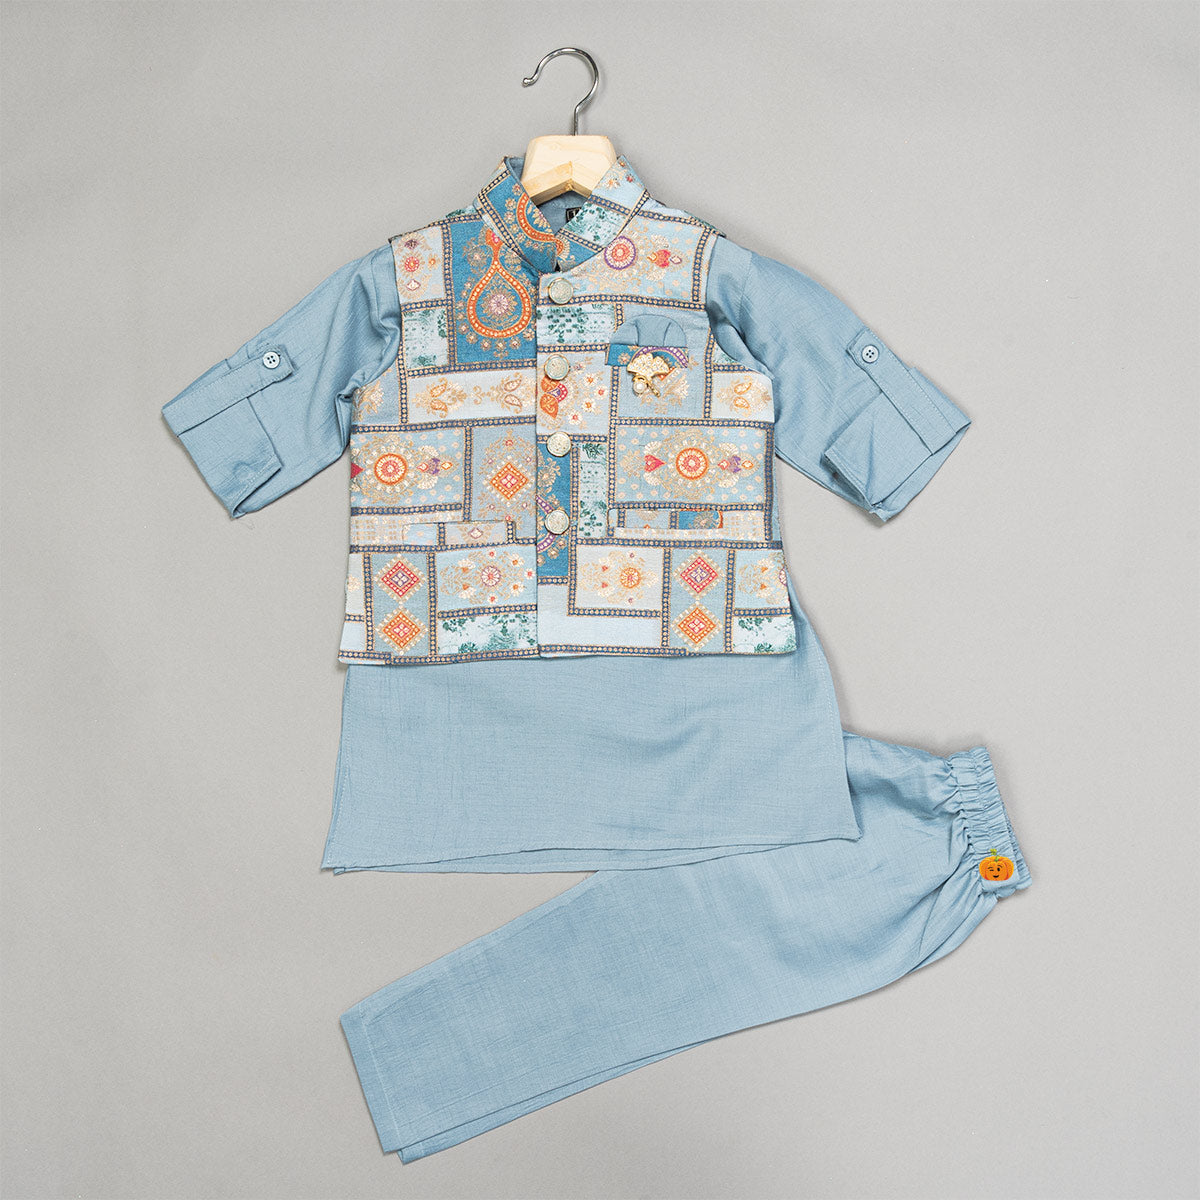 Petit Ami,smocked daygown,smocked day gown,baby daygown,baby day gown,baby  gown,baby boy gown,newborn daygown,newborn day gown,newborn gown,baby take  home outfit,baby coming home outfit,baby homecoming outfit,baby boy take  home,baby boy daygown,baby ...